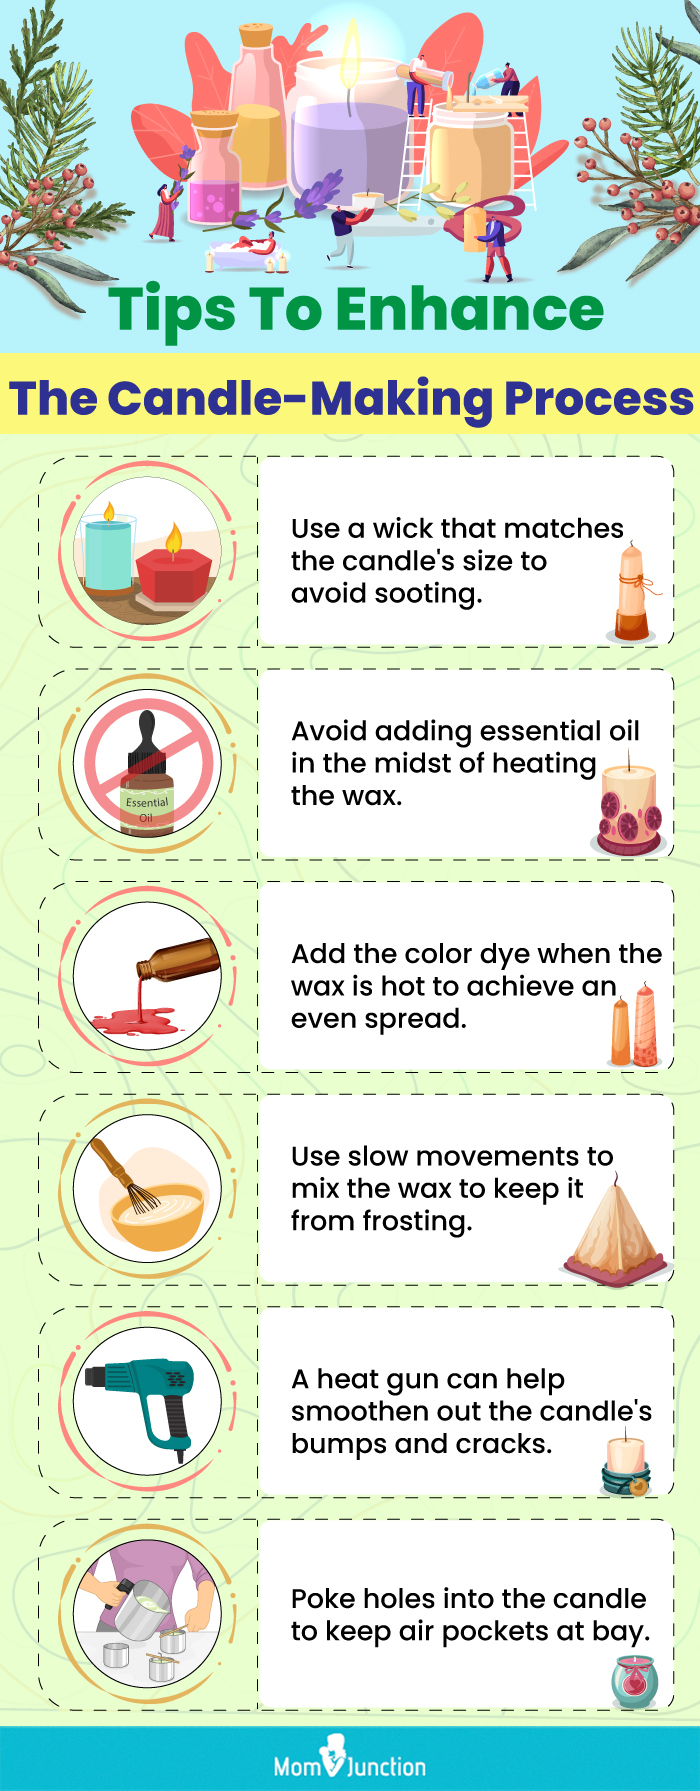 Tips To Enhance The Candle Making Process